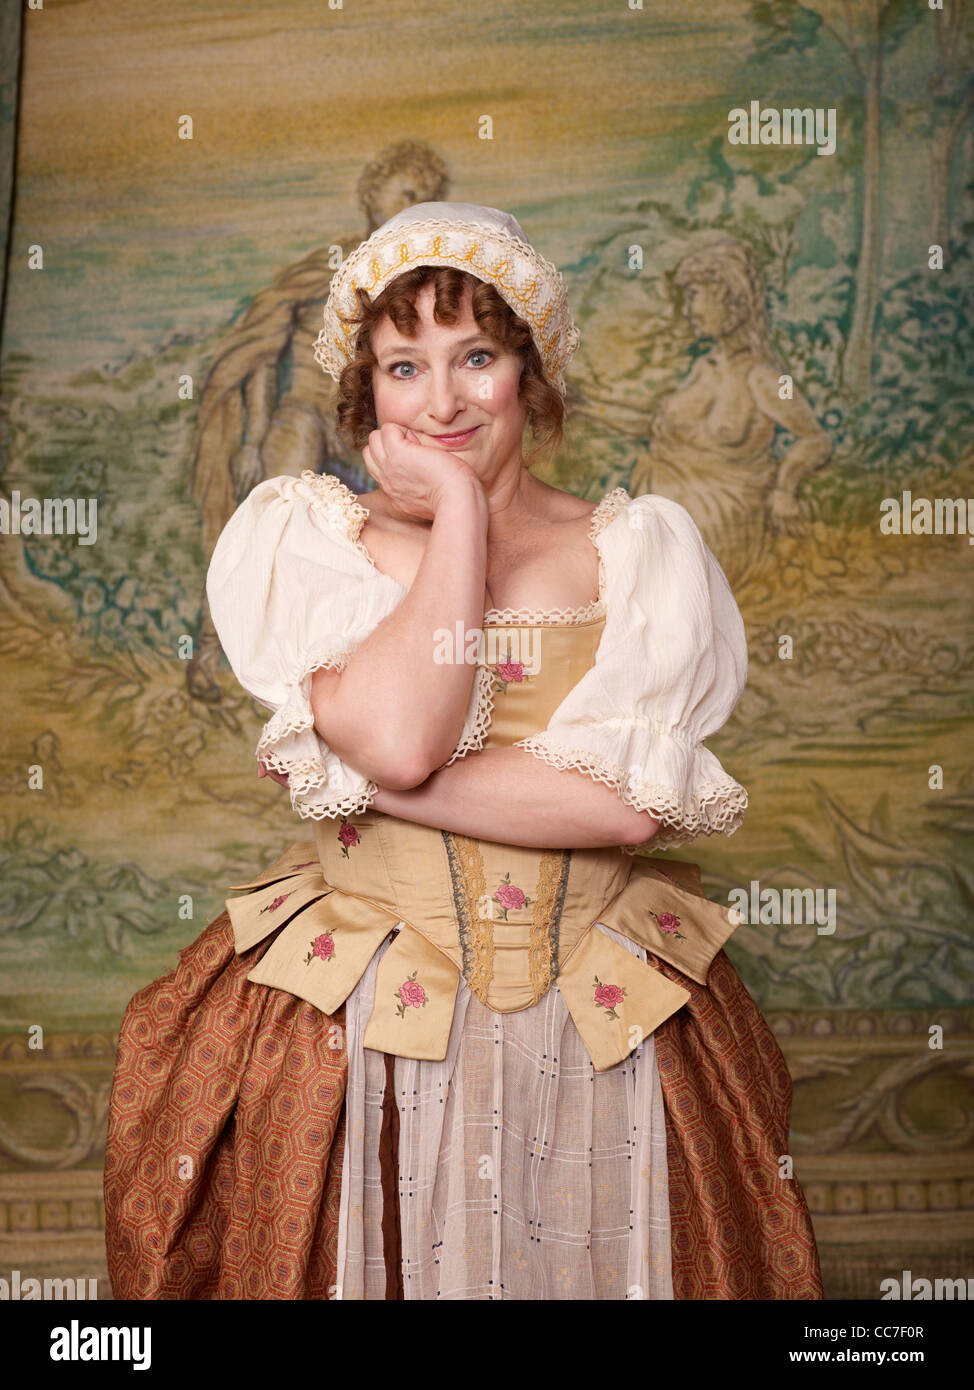 Actress dressed in old-fashioned costume on stage Stock Photo - Alamy